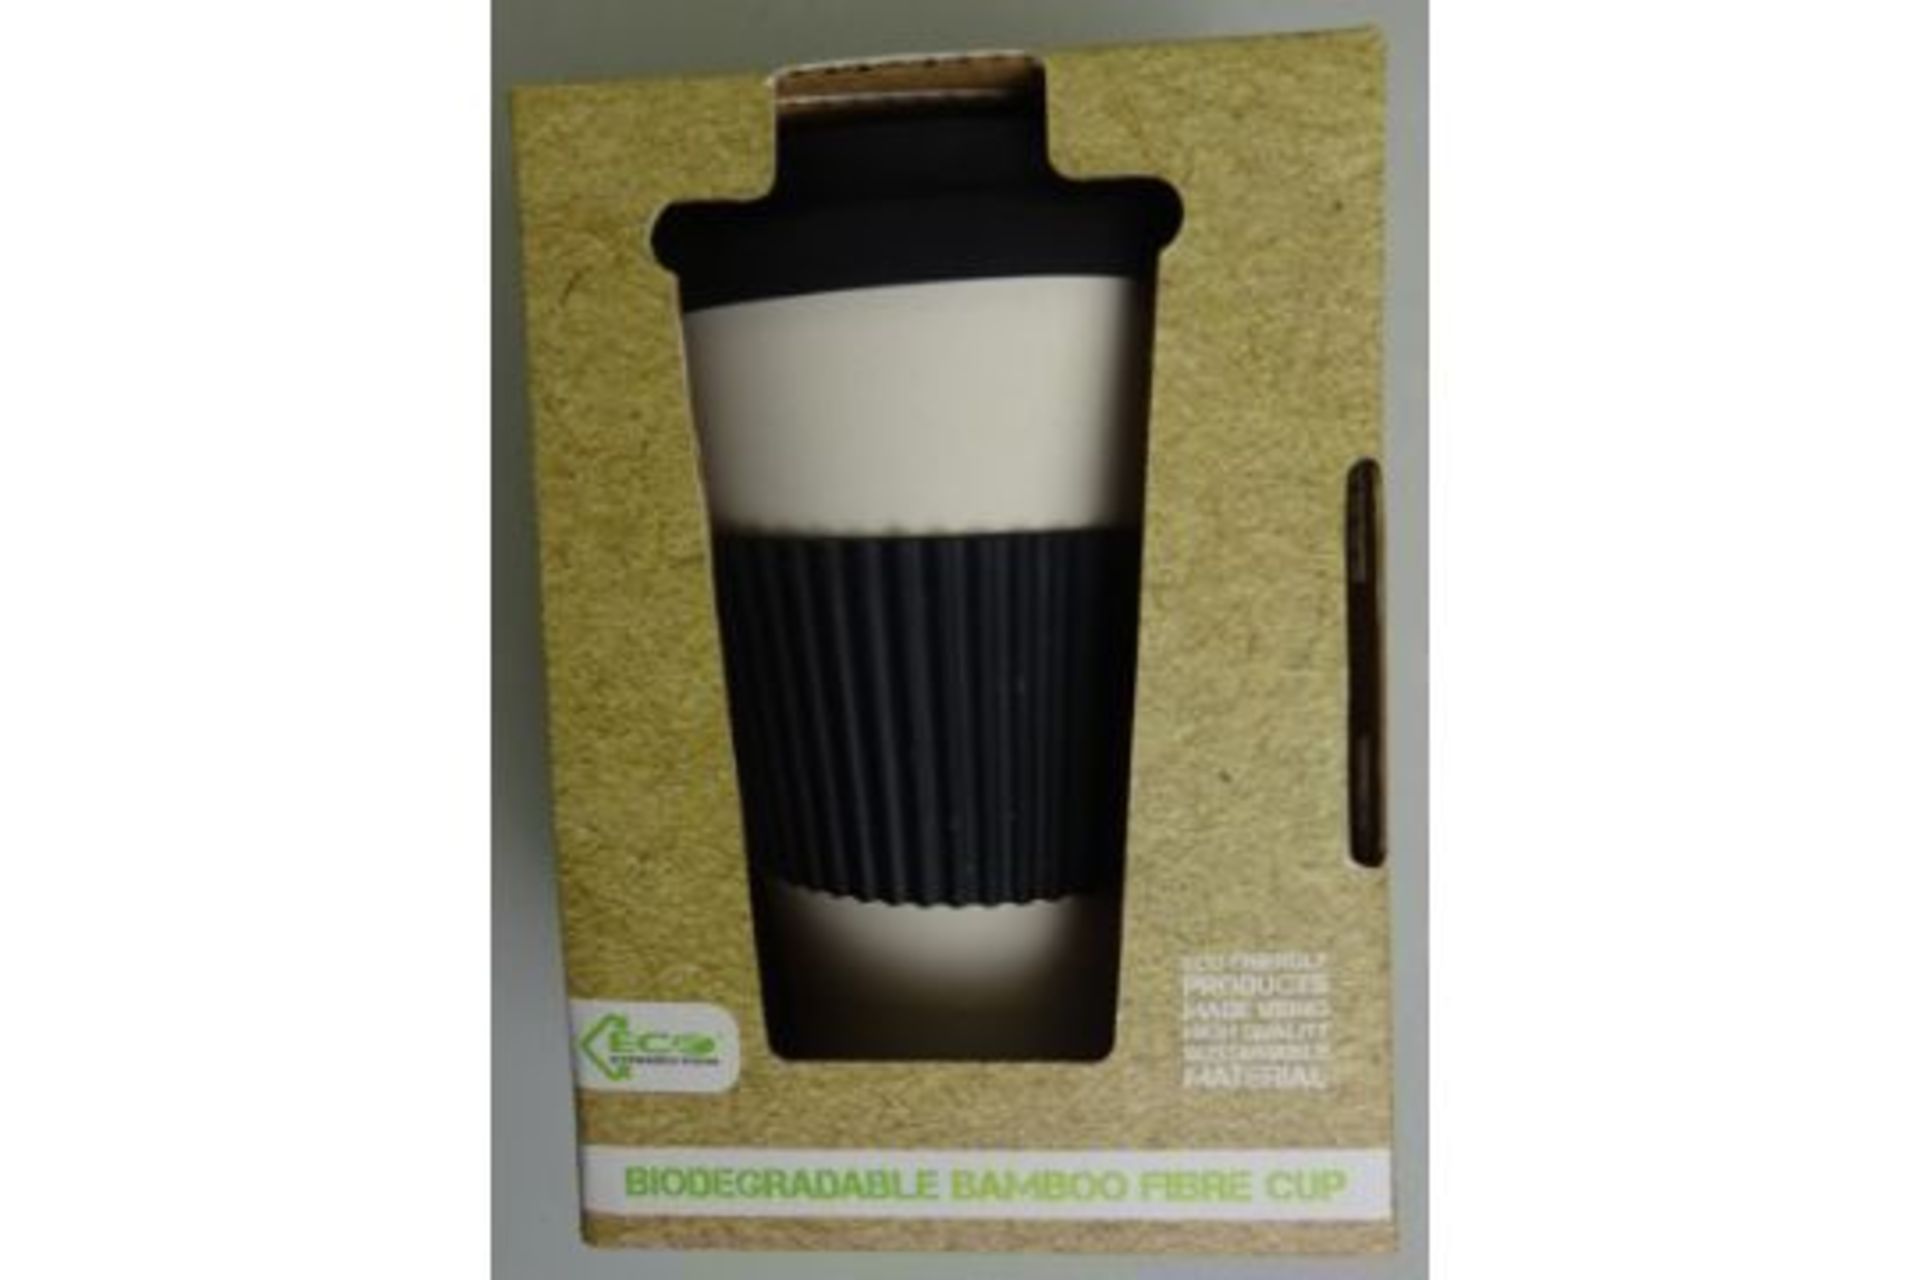 Black Biodegradable Bamboo Fibre Cup - Image 2 of 2